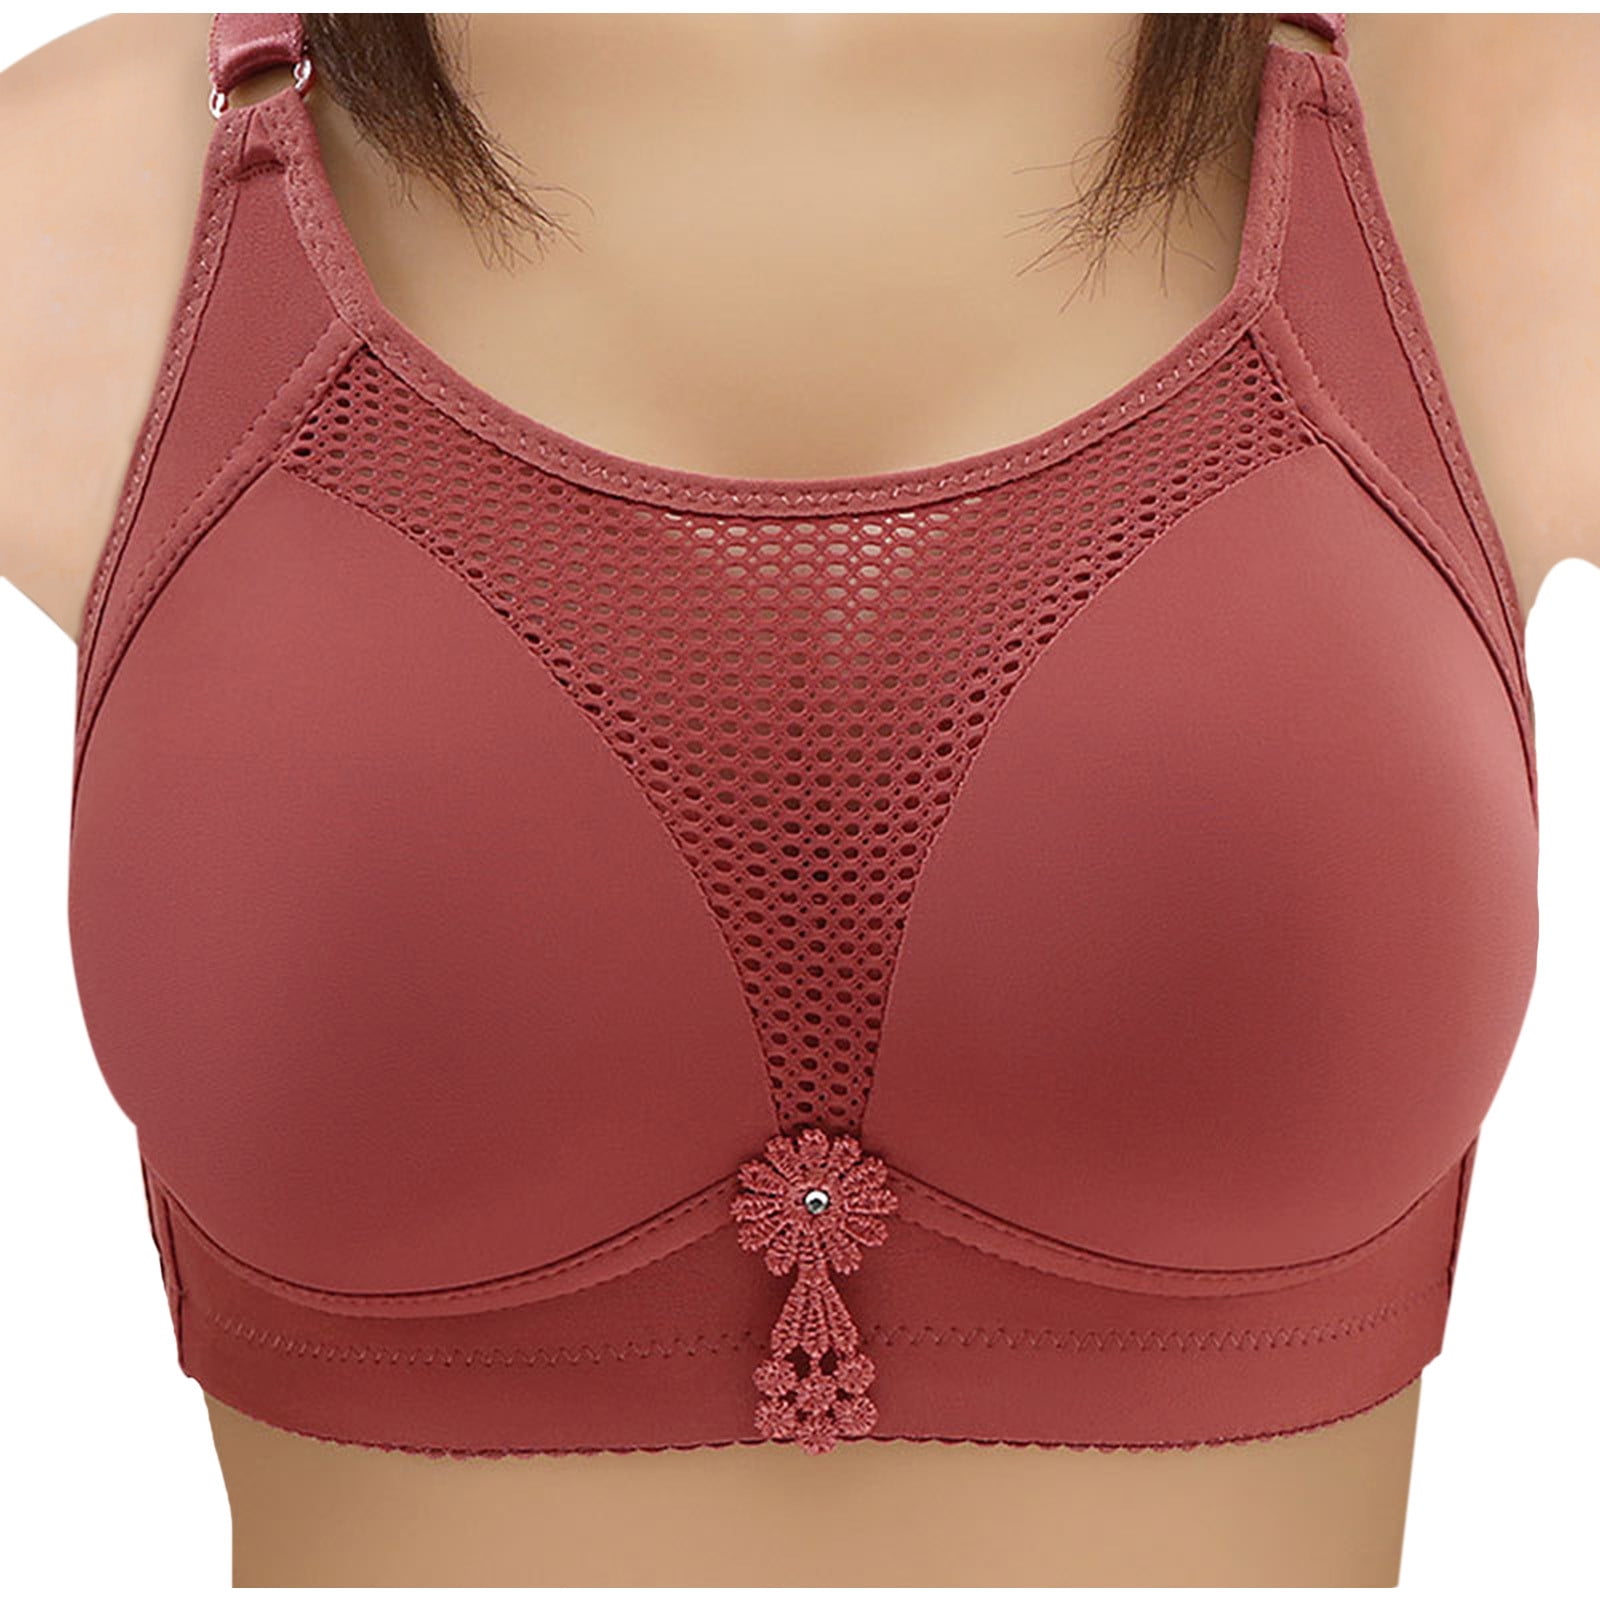 Ydkzymd Mastectomy Bras with Pockets for Prosthesis Front Closure Plus Size  Padded Shapewear Push Up Bra Plunge supportive Push Up Bras Complexion 40B